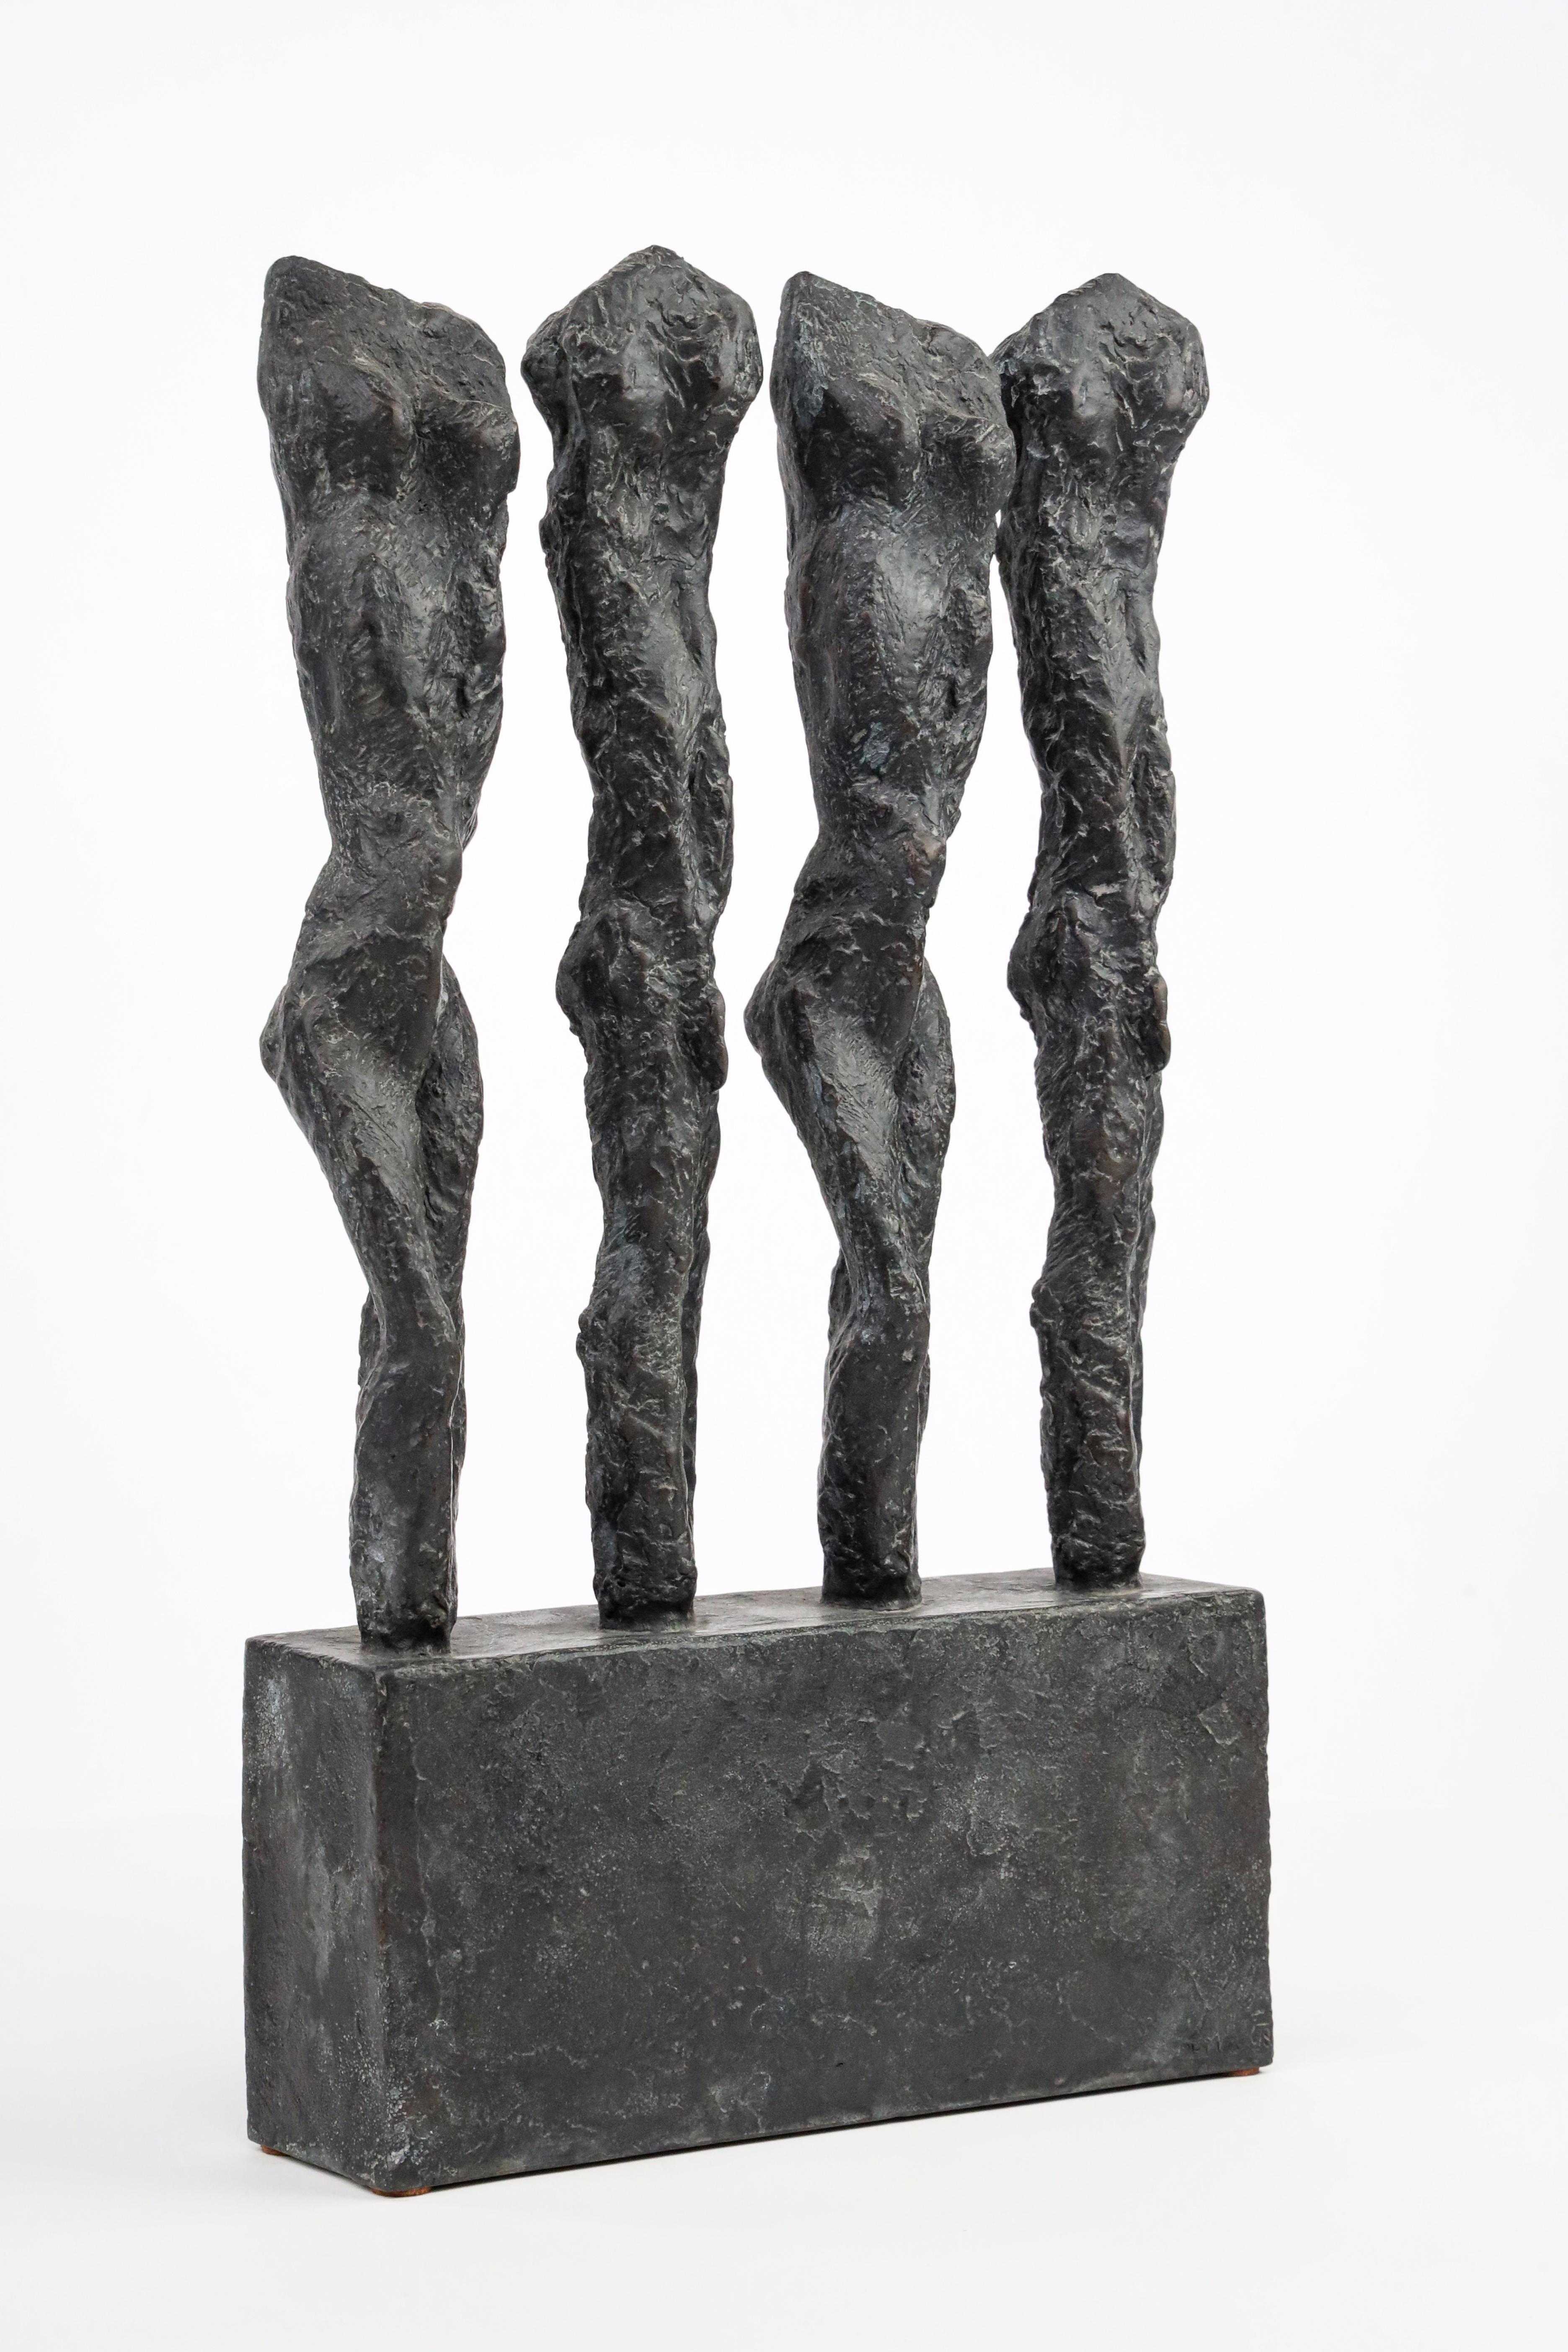 Martine Demal Figurative Sculpture - In Line by M. Demal - Bronze sculpture, group of female figures, semi-abstract